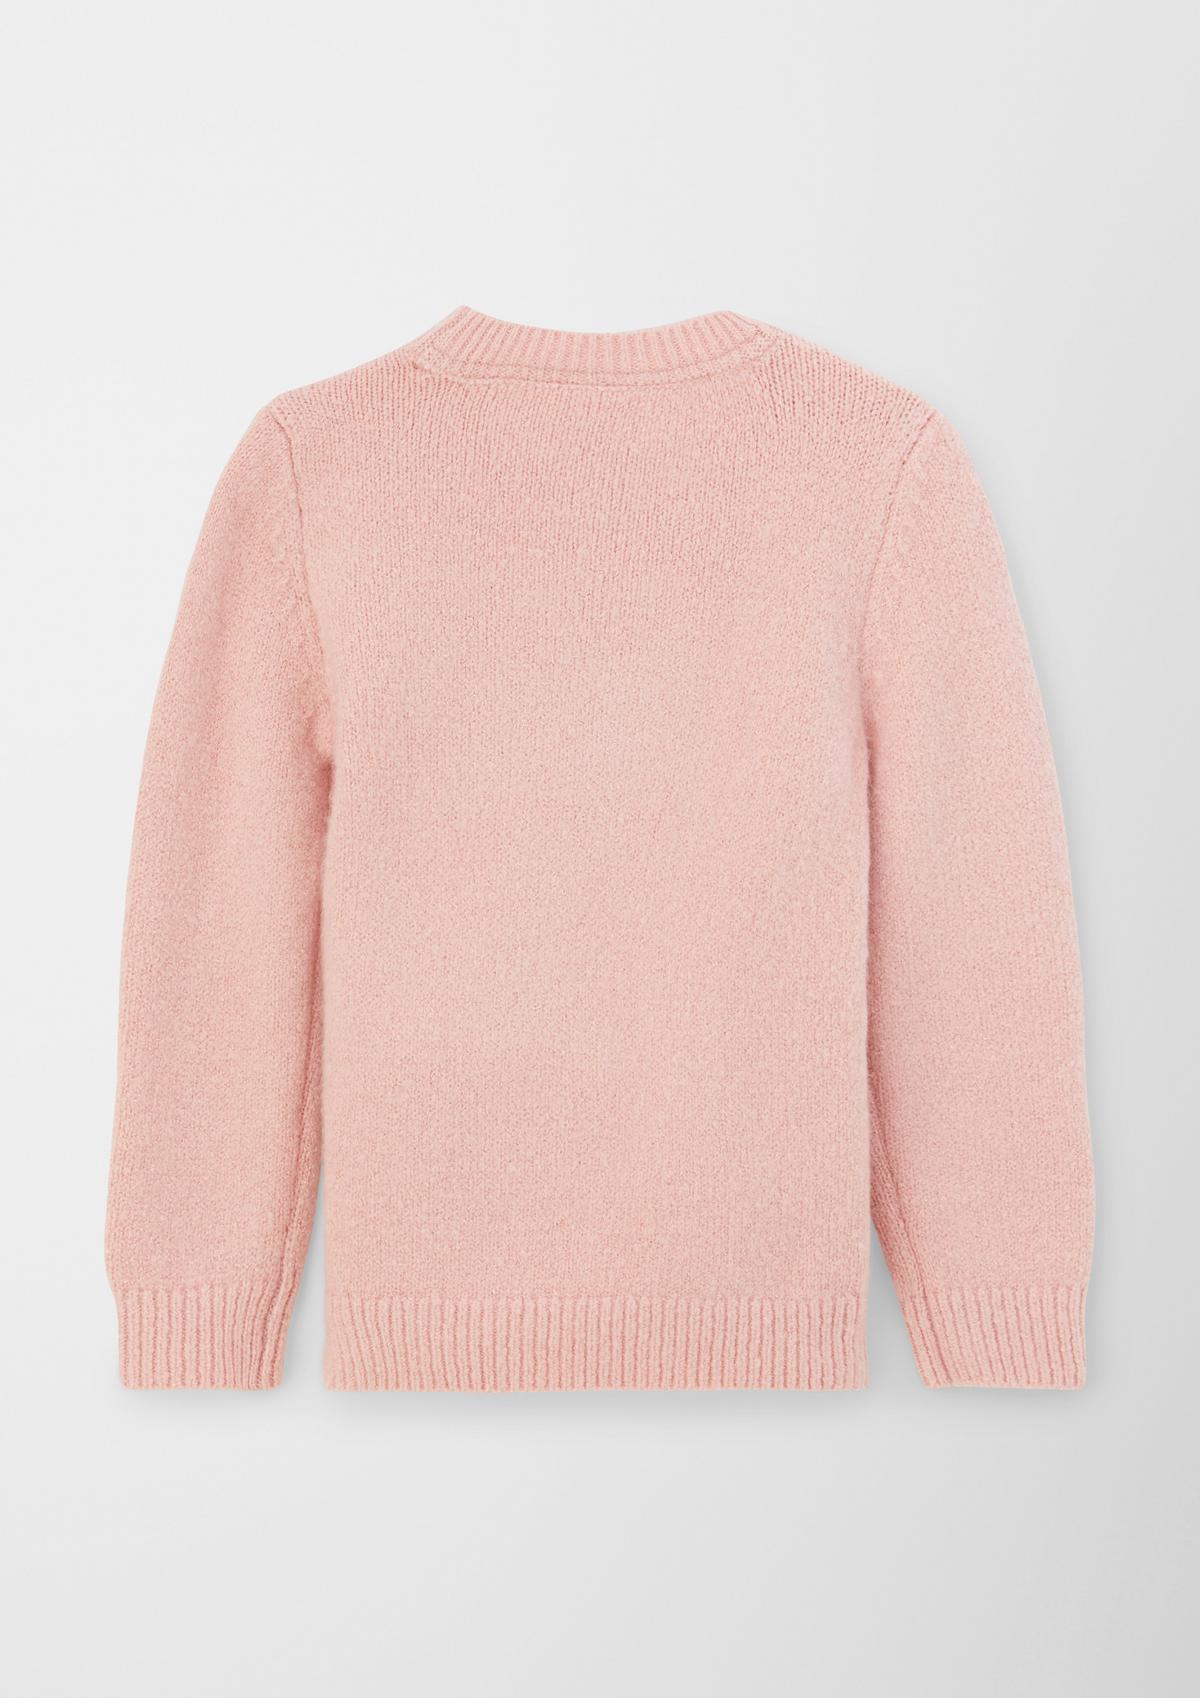 s.Oliver Jumper with a unicorn motif